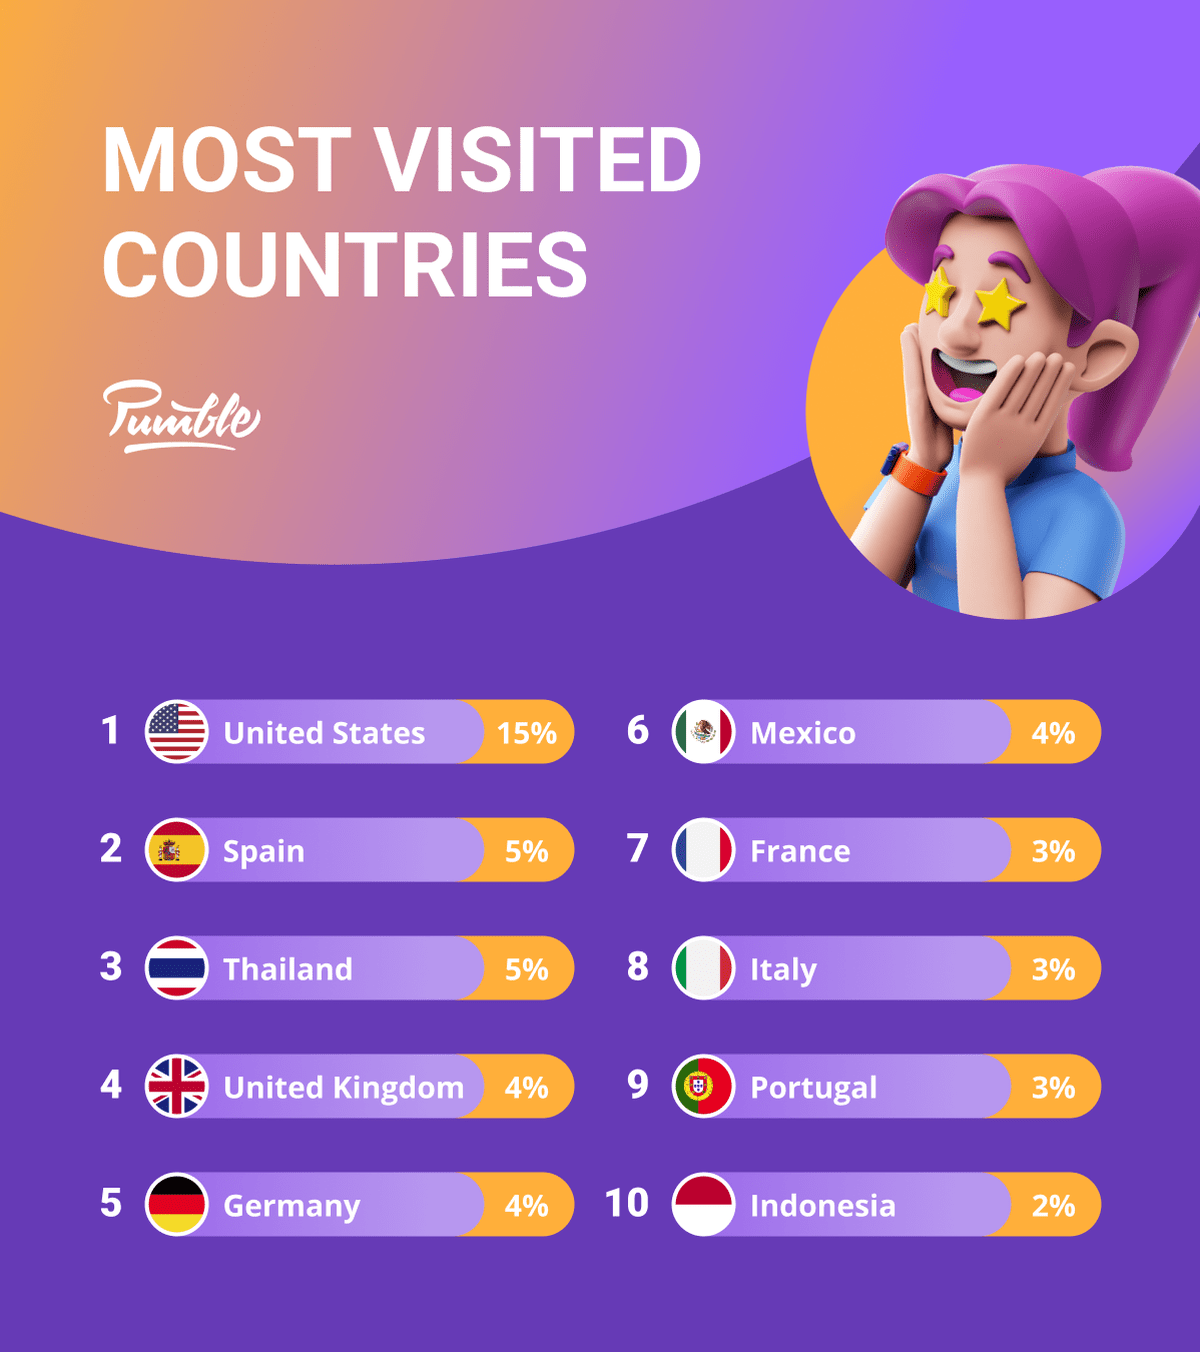 Most visited countries by digital nomads, according to the Nomad List